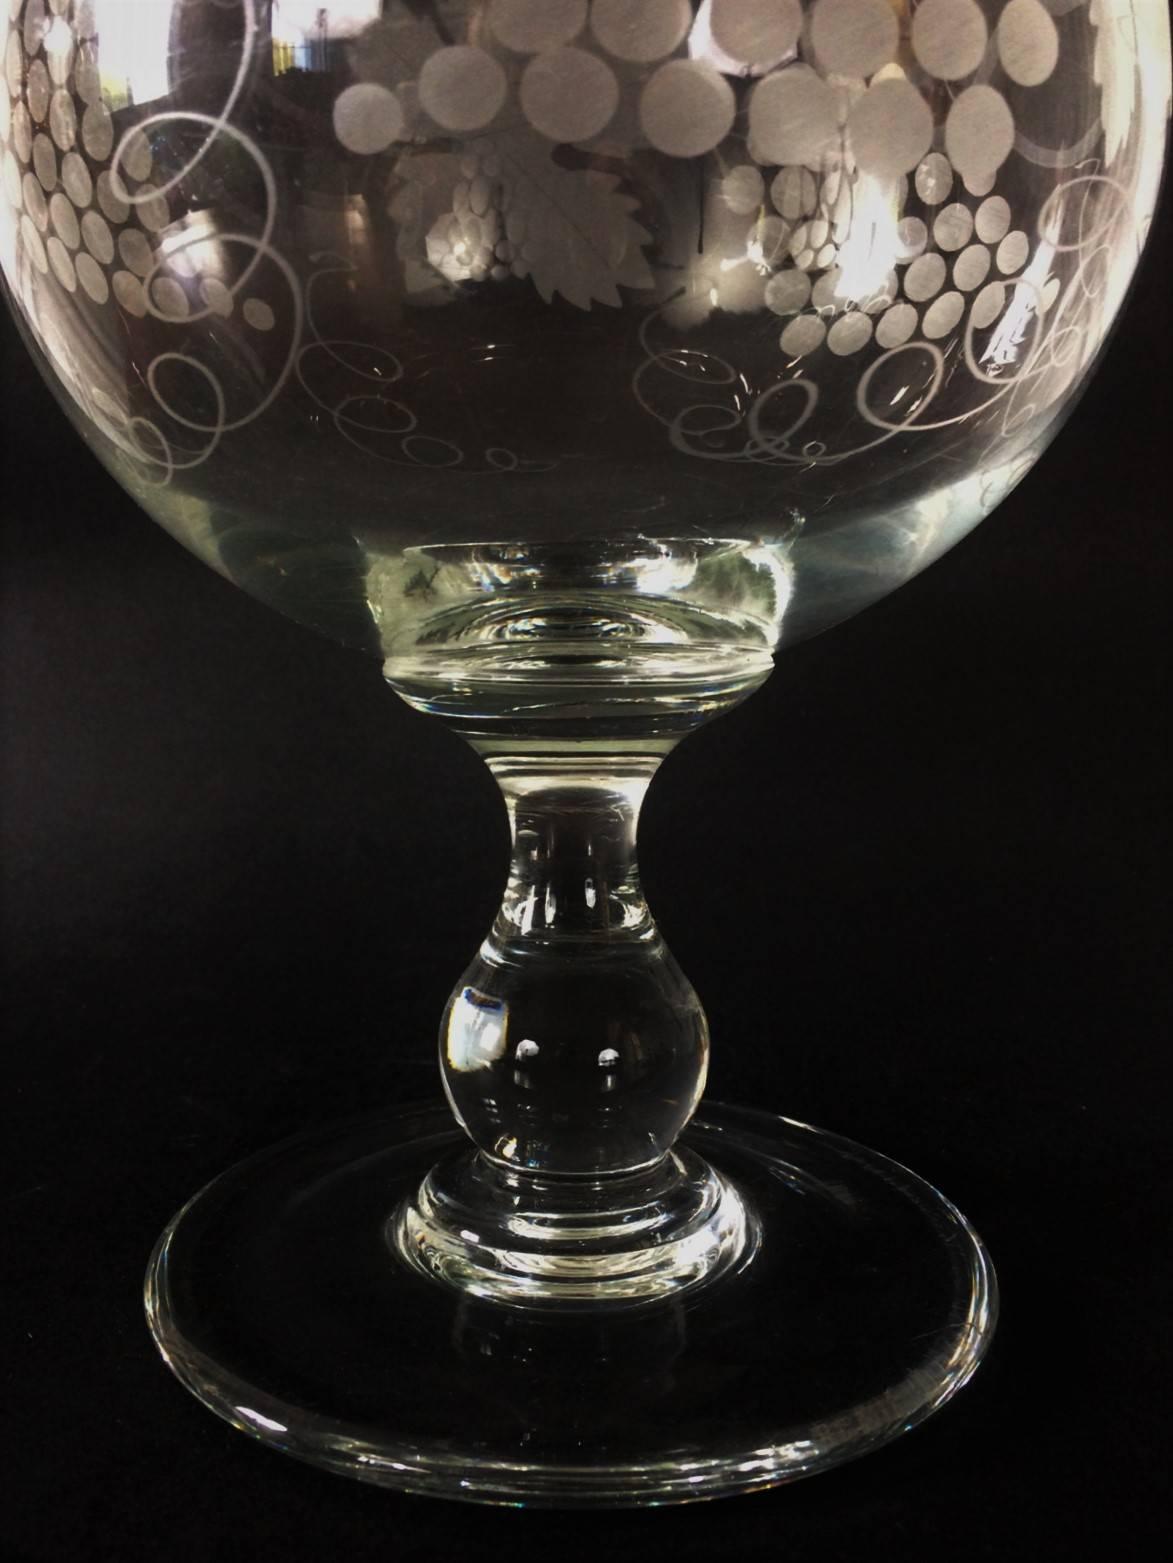 Great refreshment cup or spittoon in white glass blown to the mouth. Decor engraved with grape leaves and bunches of grapes.
Art Nouveau
France.
Late 19th  century.
